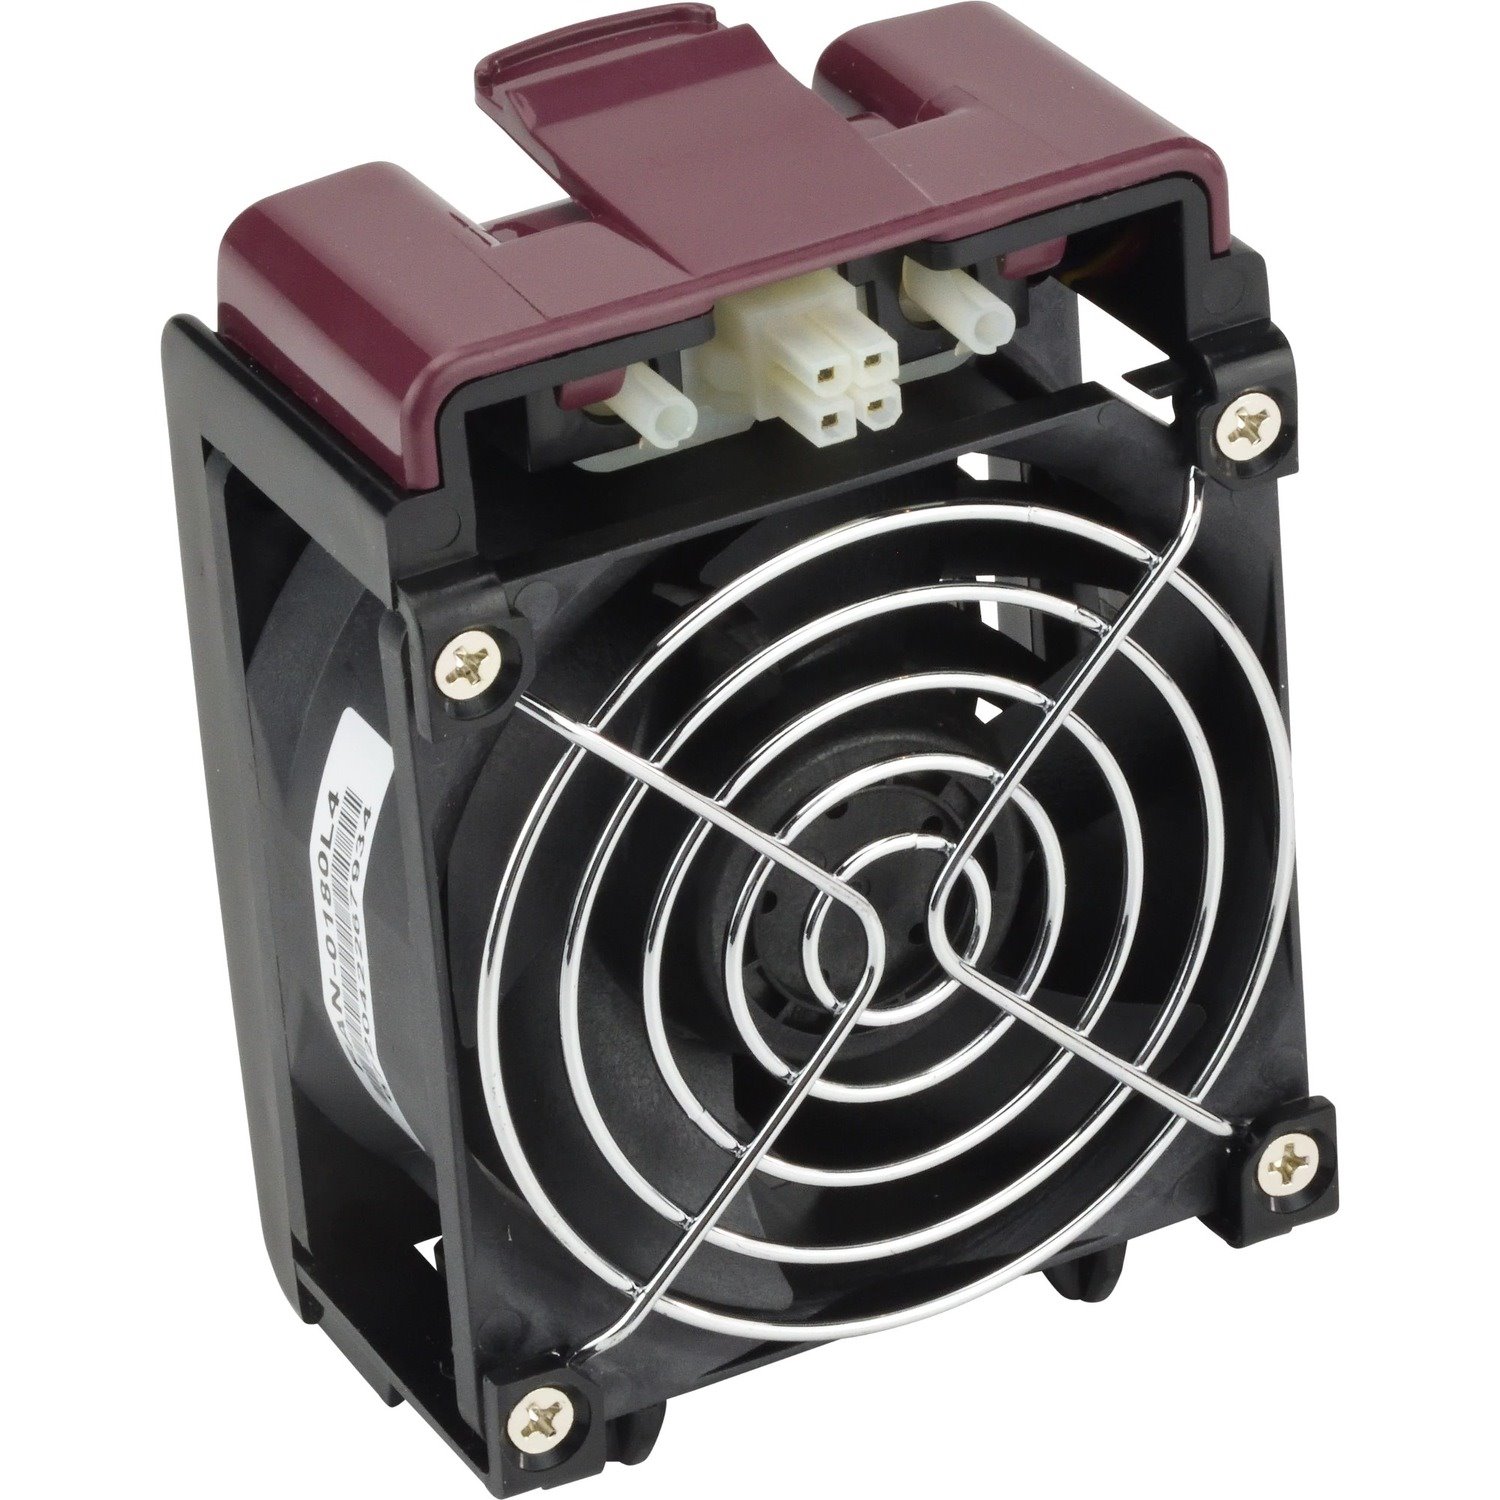 Supermicro 80mm Hot-Swappable Rear Exhaust Axial Fan